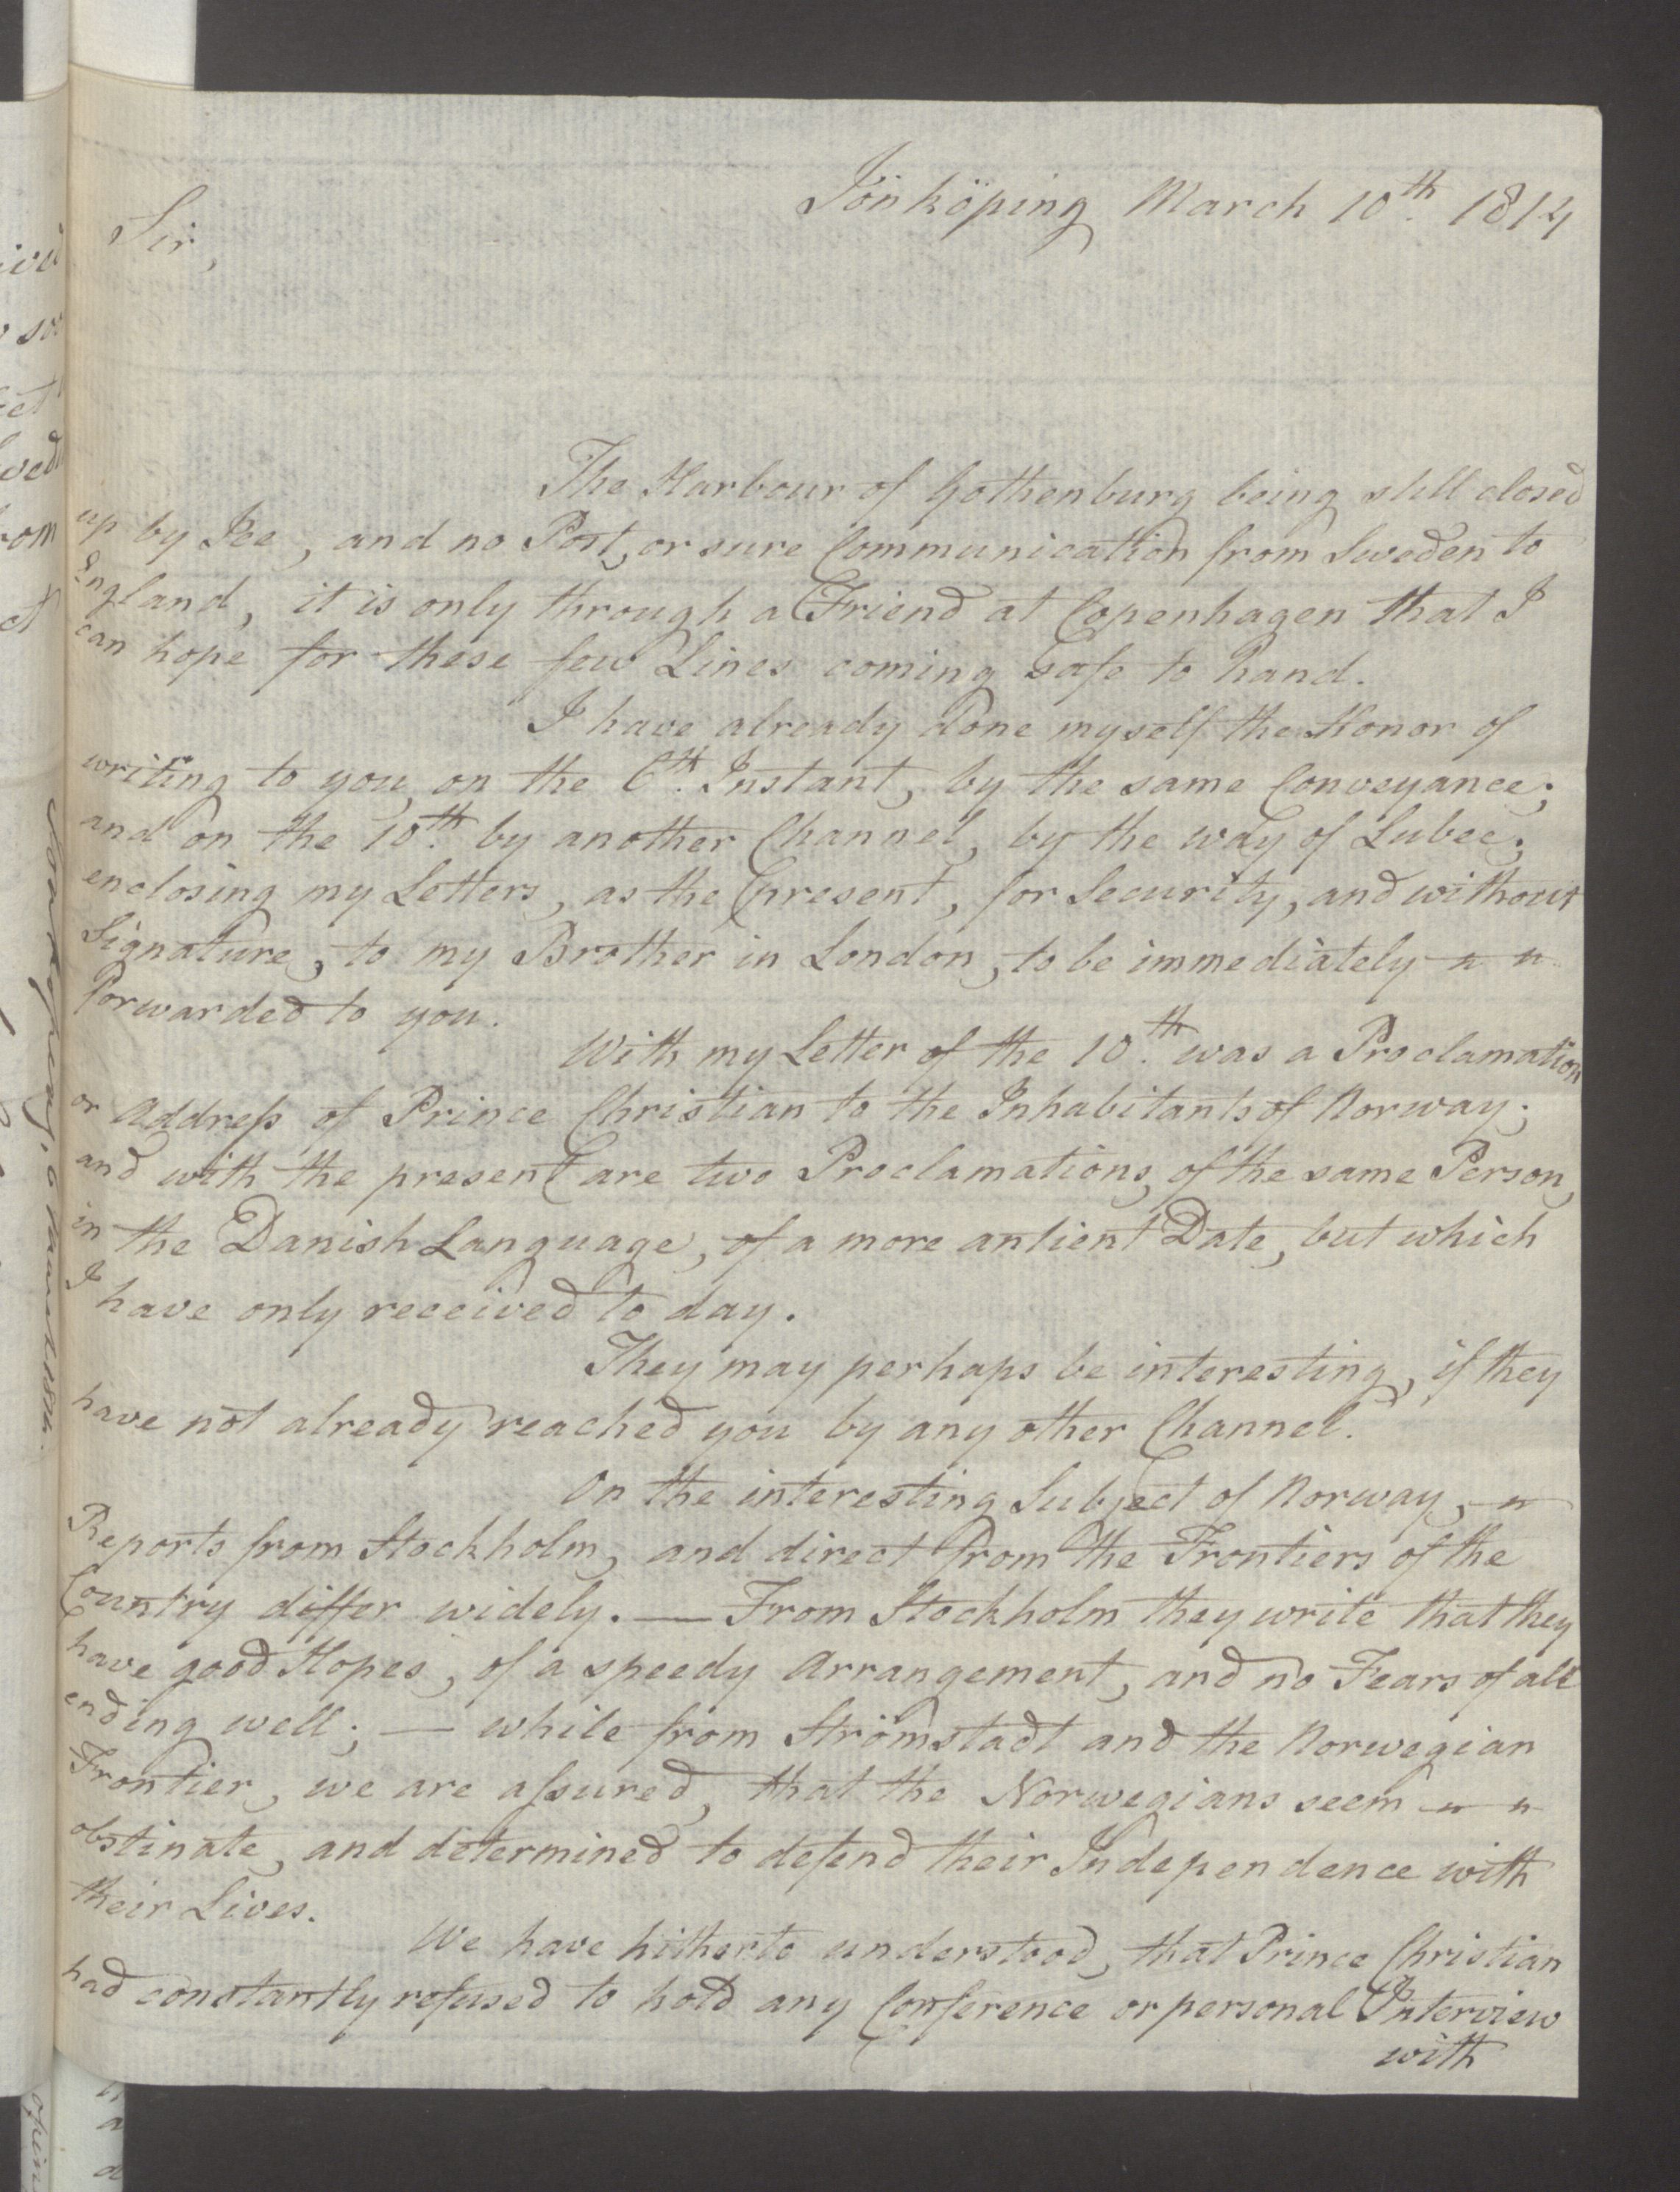 Foreign Office*, UKA/-/FO 38/16: Sir C. Gordon. Reports from Malmö, Jonkoping, and Helsingborg, 1814, p. 22